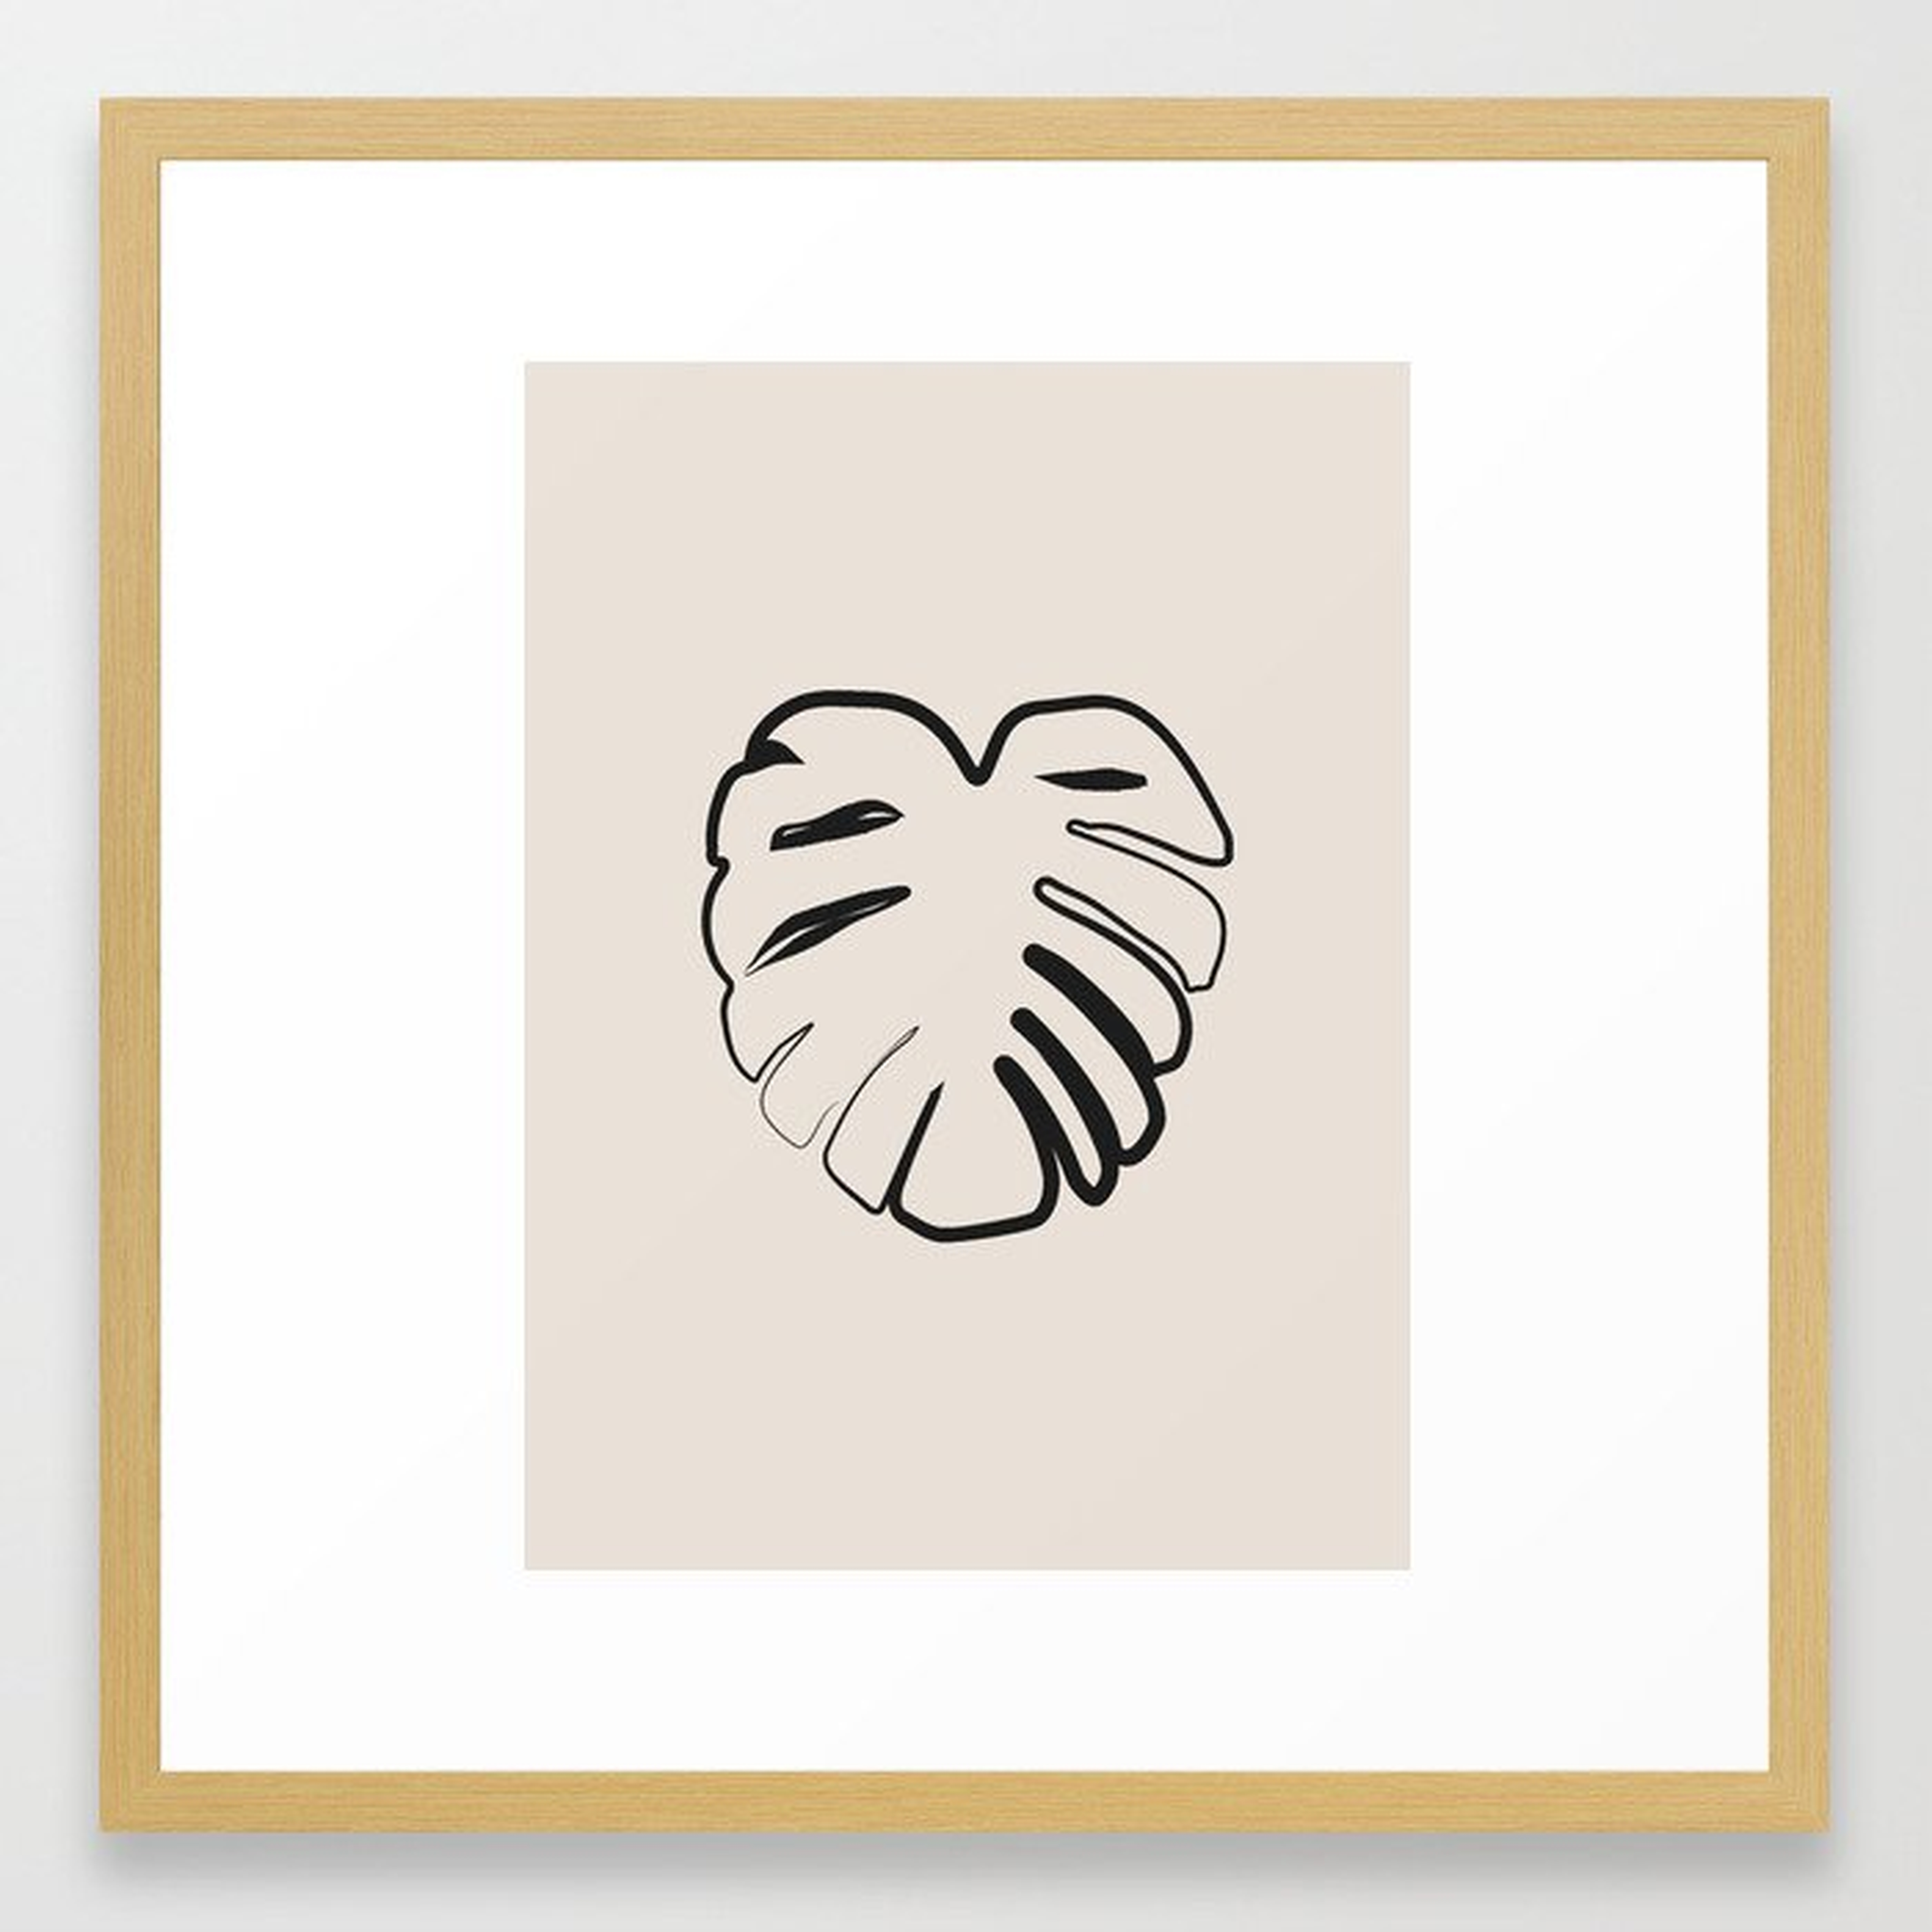 Neutral Beach Collection - Monstera Line Print Framed Art Print by Grace - Conservation Natural - MEDIUM (Gallery)-22x22 - Society6